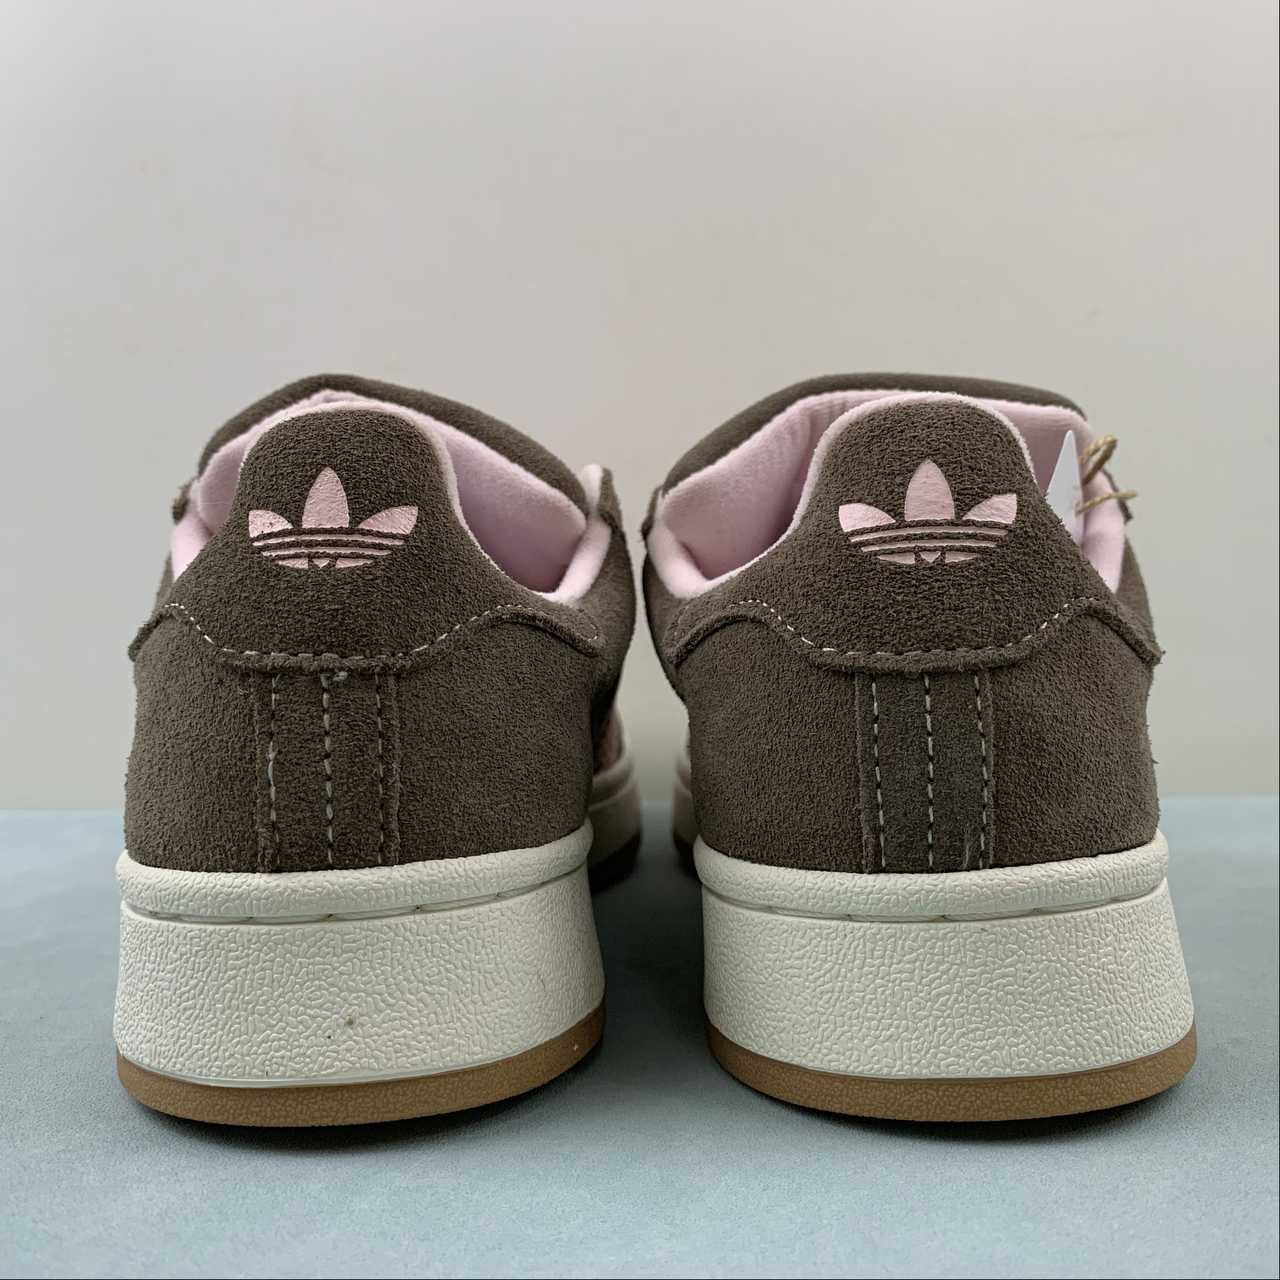 Adidas campus brown pink shoes